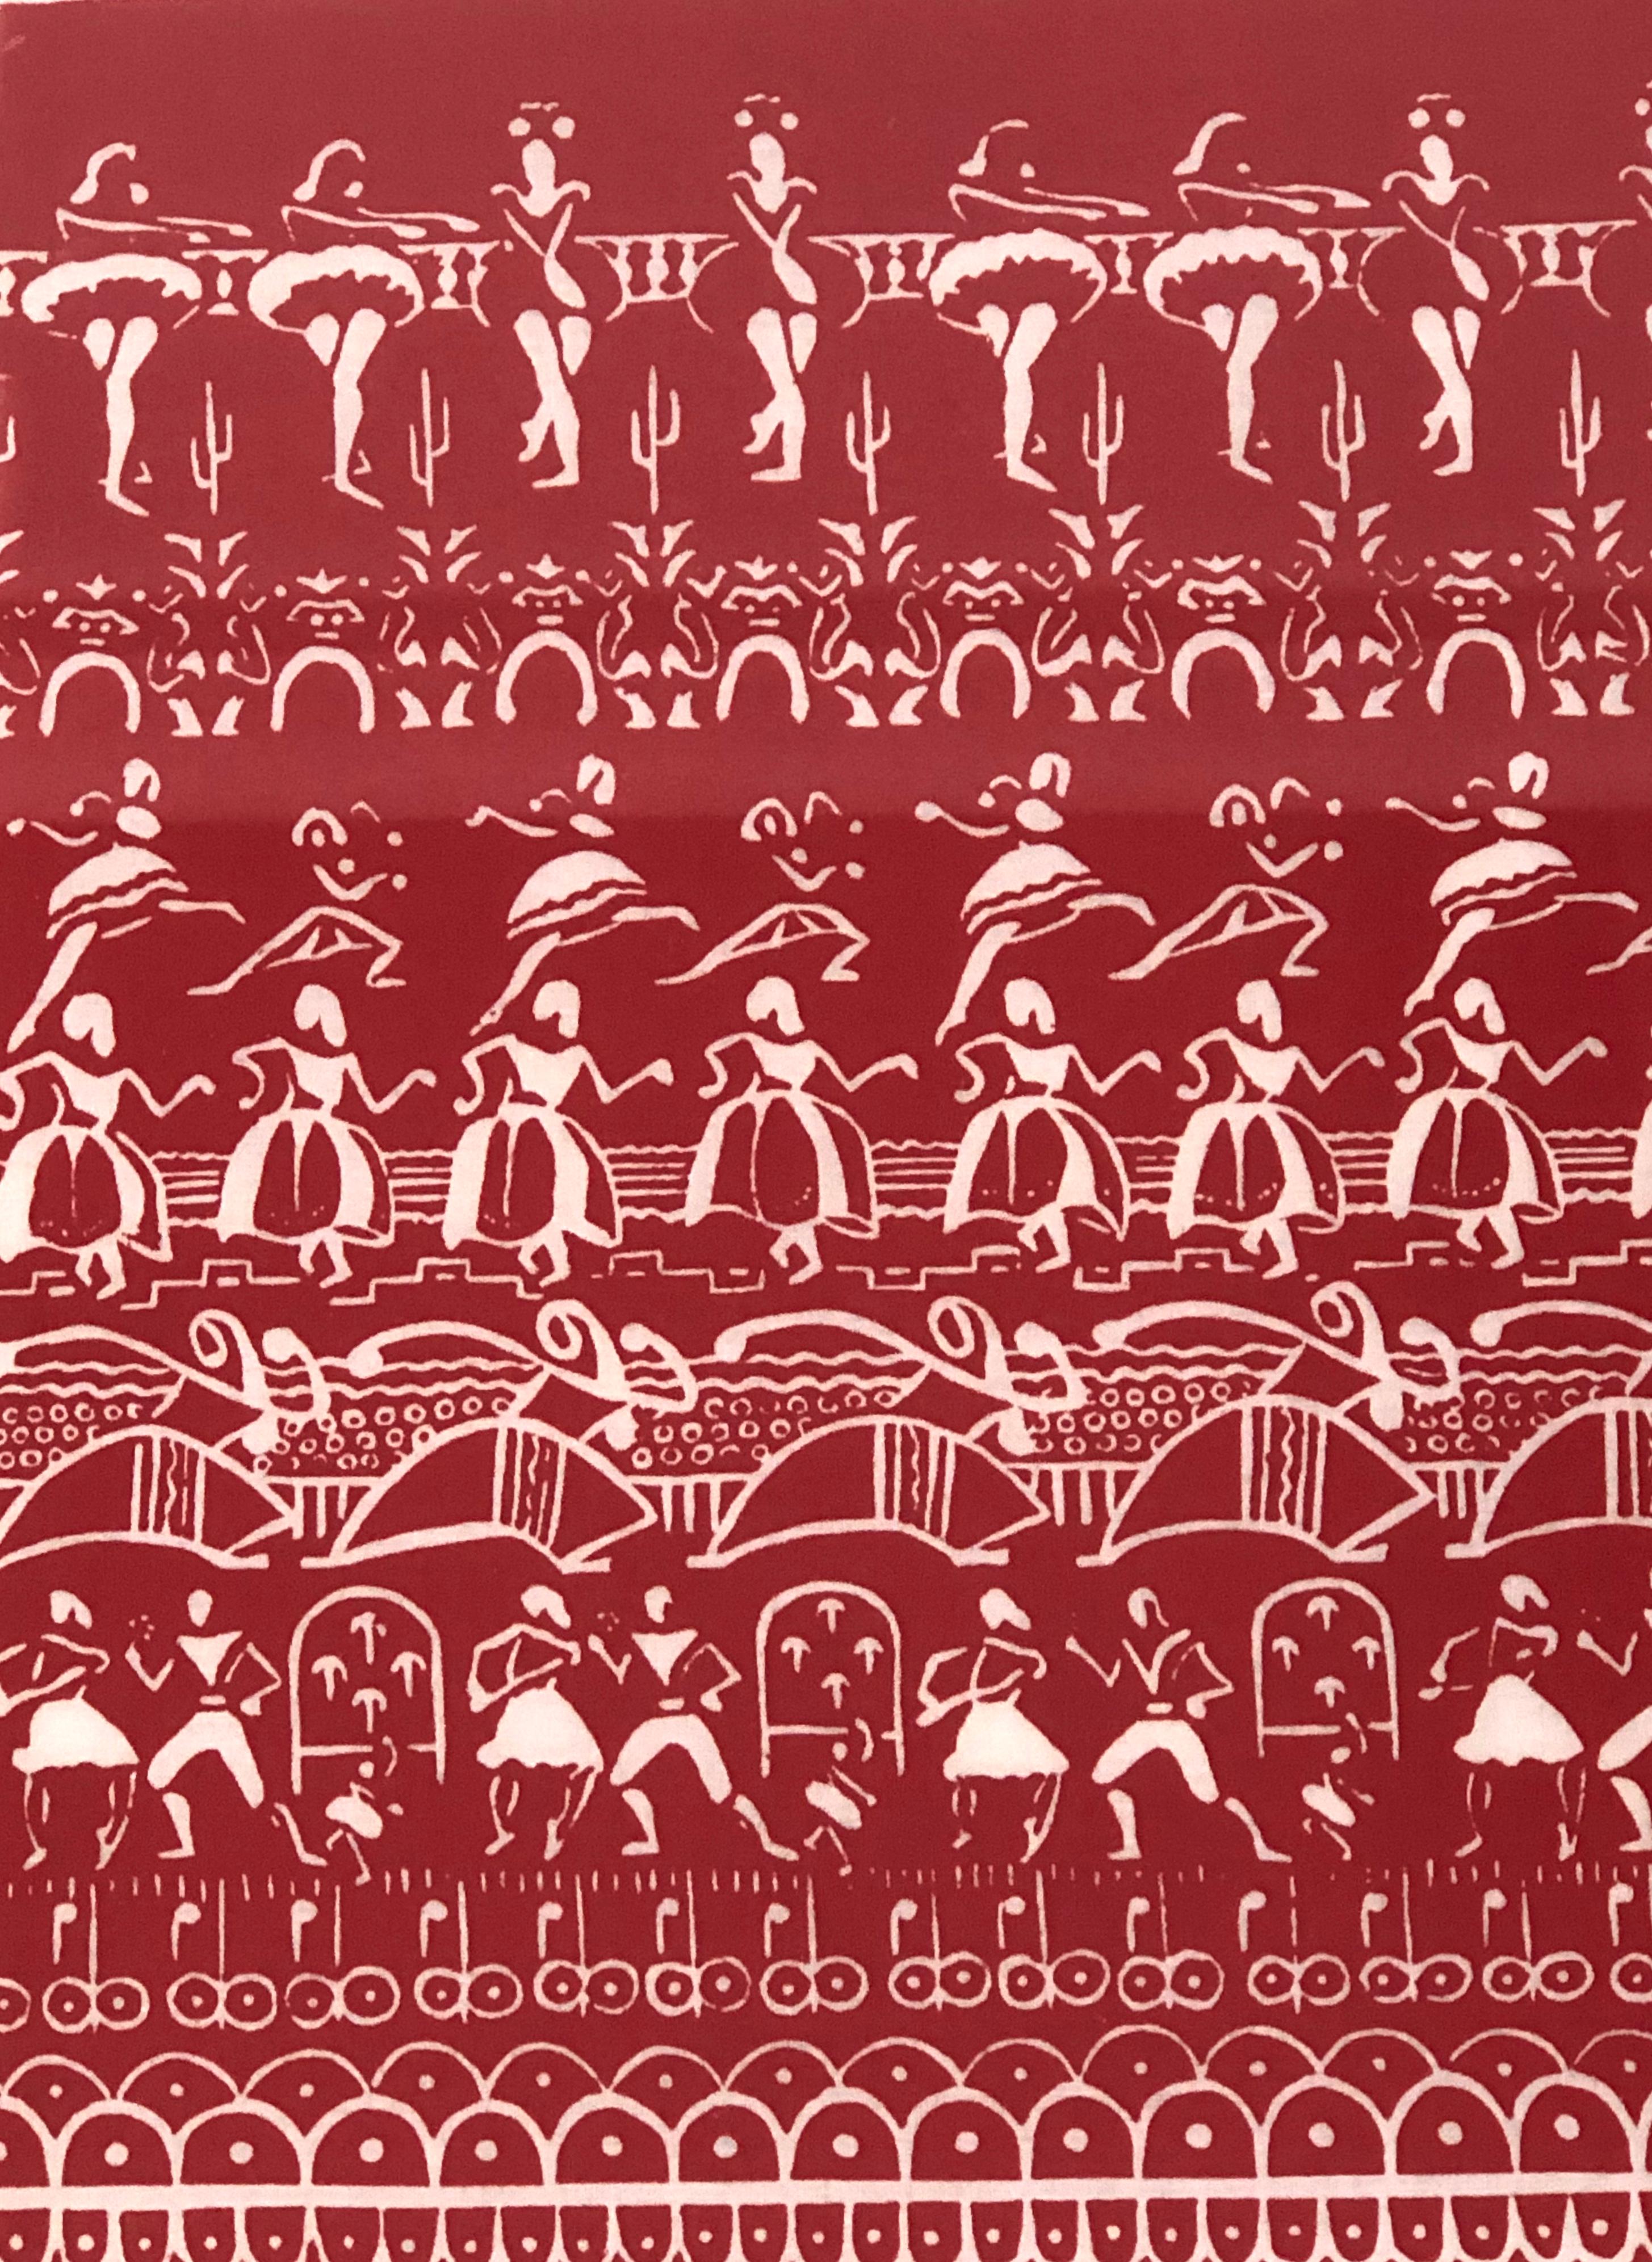 An original Folly Cove Designers hand block printed textile, in the rare Ballet Rehearsal pattern designed by Anthony Iarrobino, circa 1952, in red on white linen. Characteristic of the best Folly Cove designs, Ballet Rehearsal tells a story,